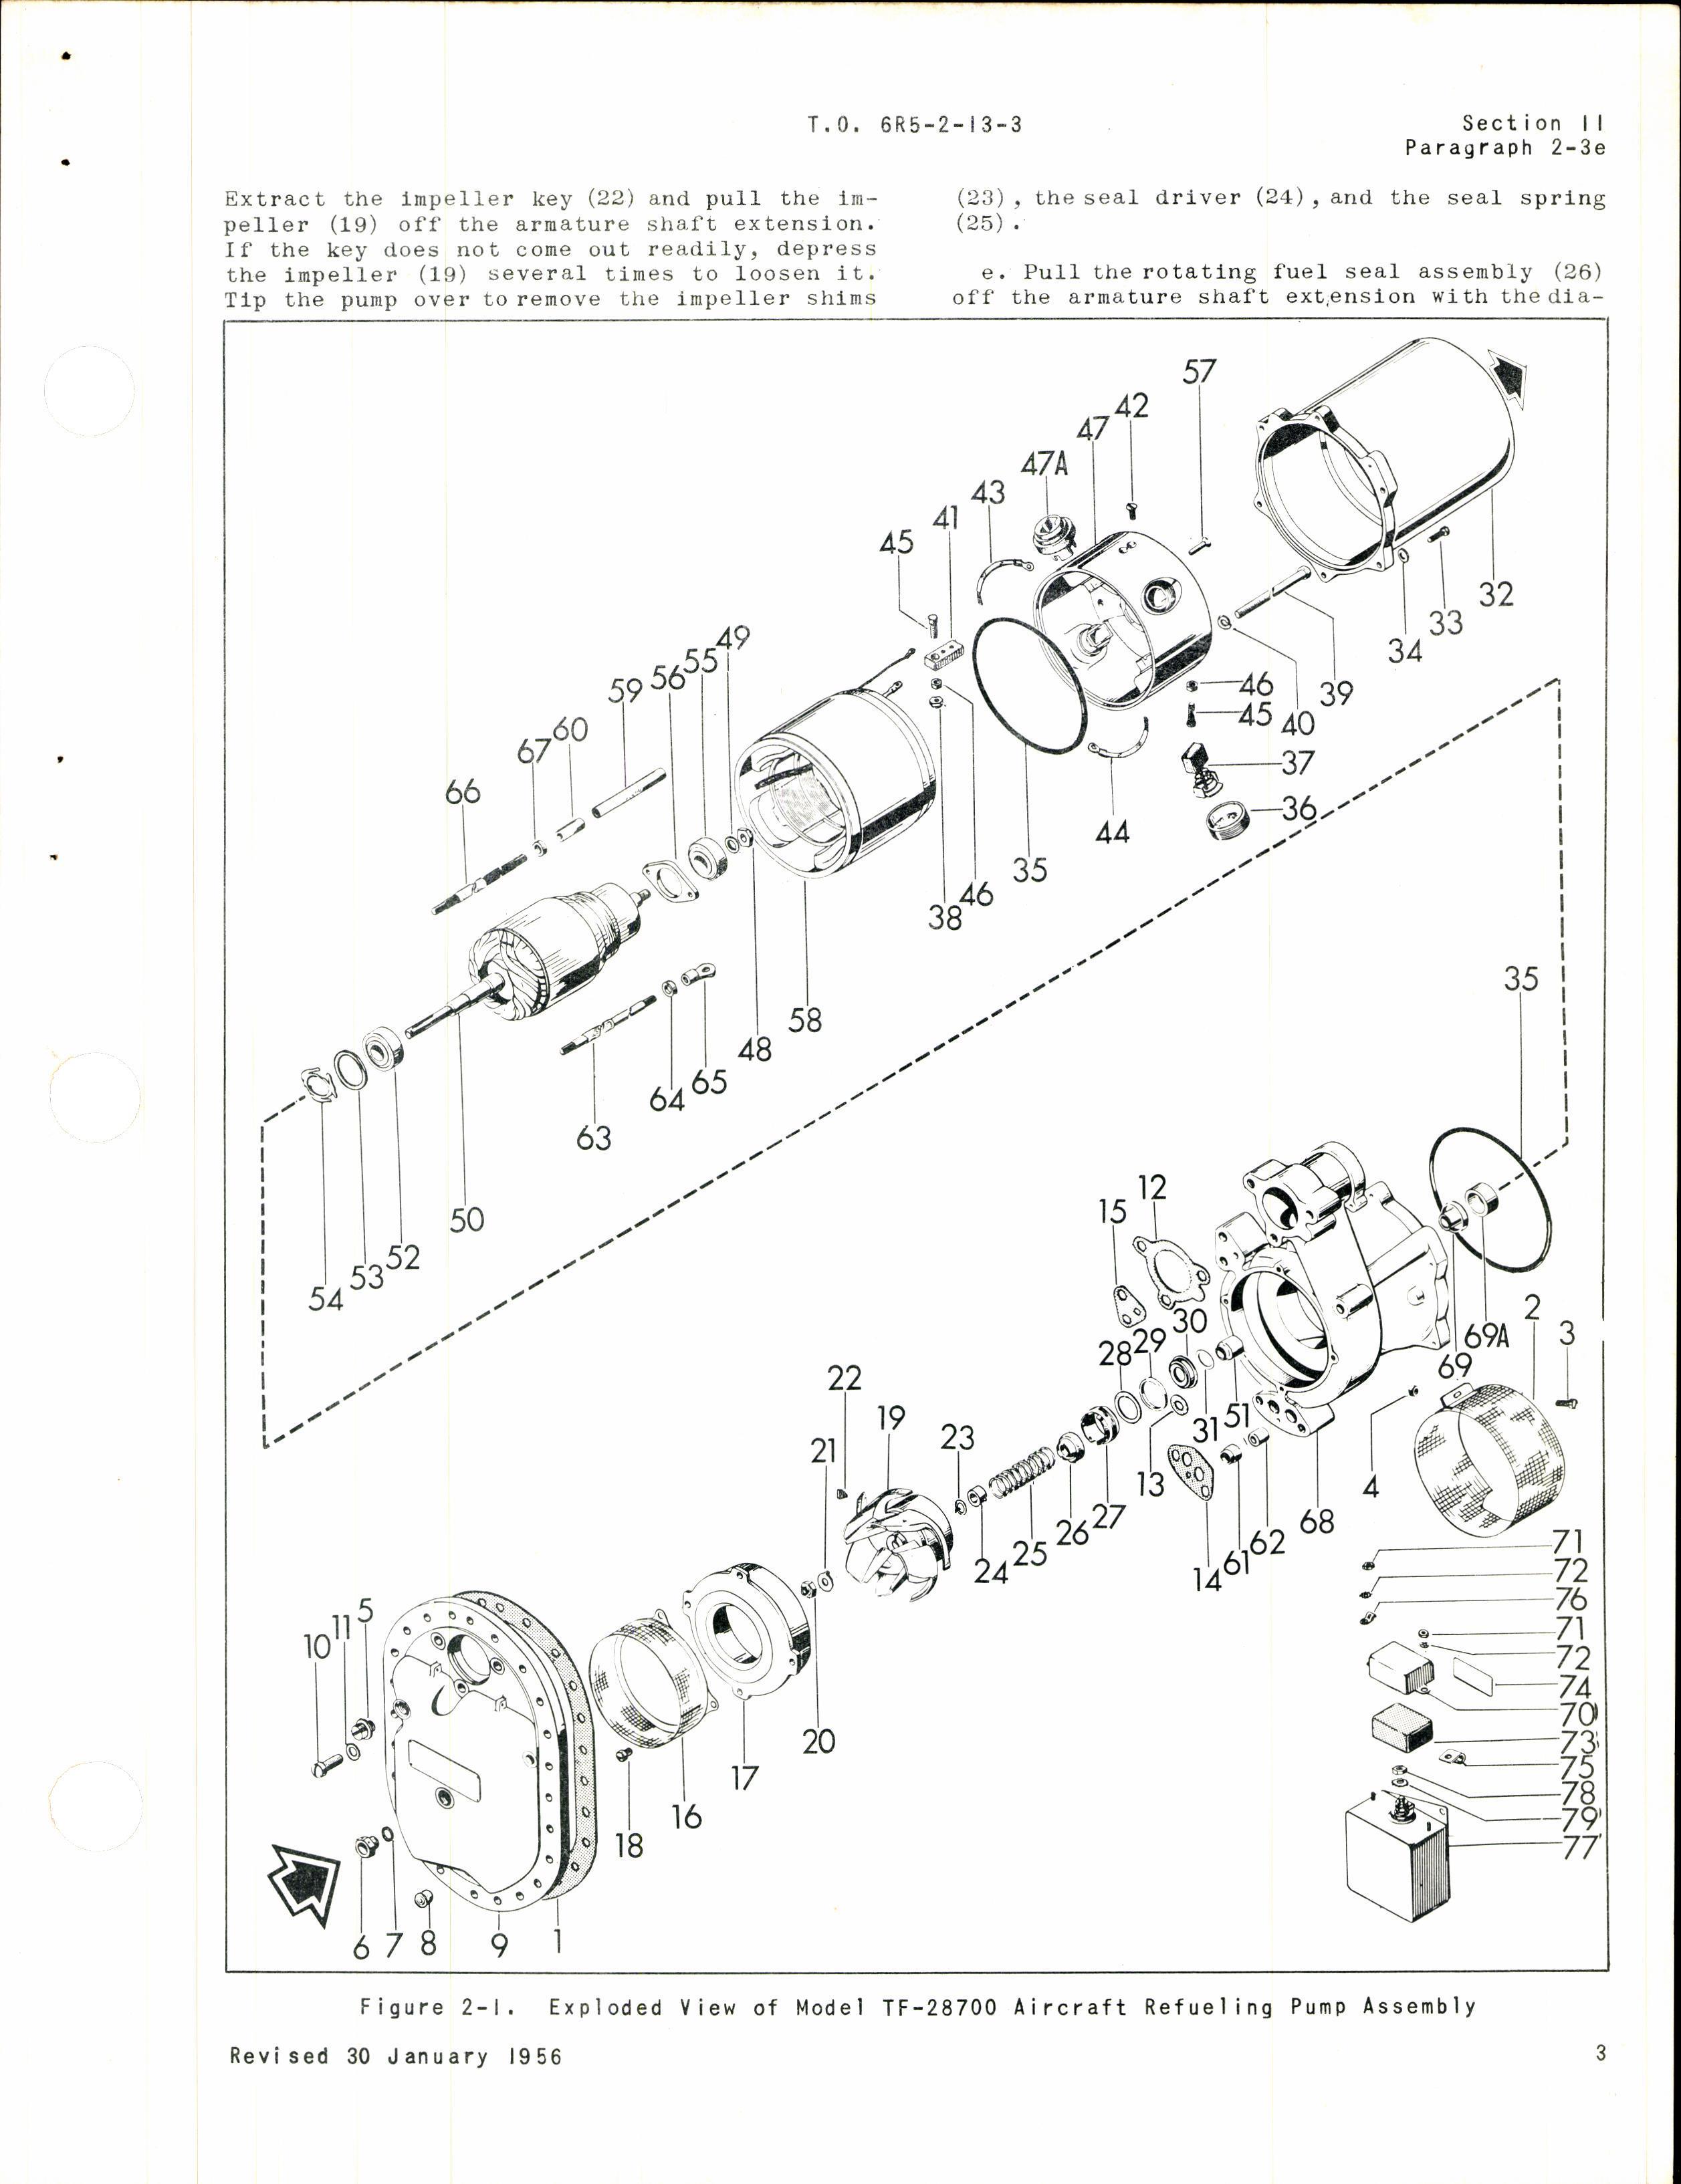 Sample page 5 from AirCorps Library document: Overhaul Instructions for Thompson Refueling and Booster Pumps